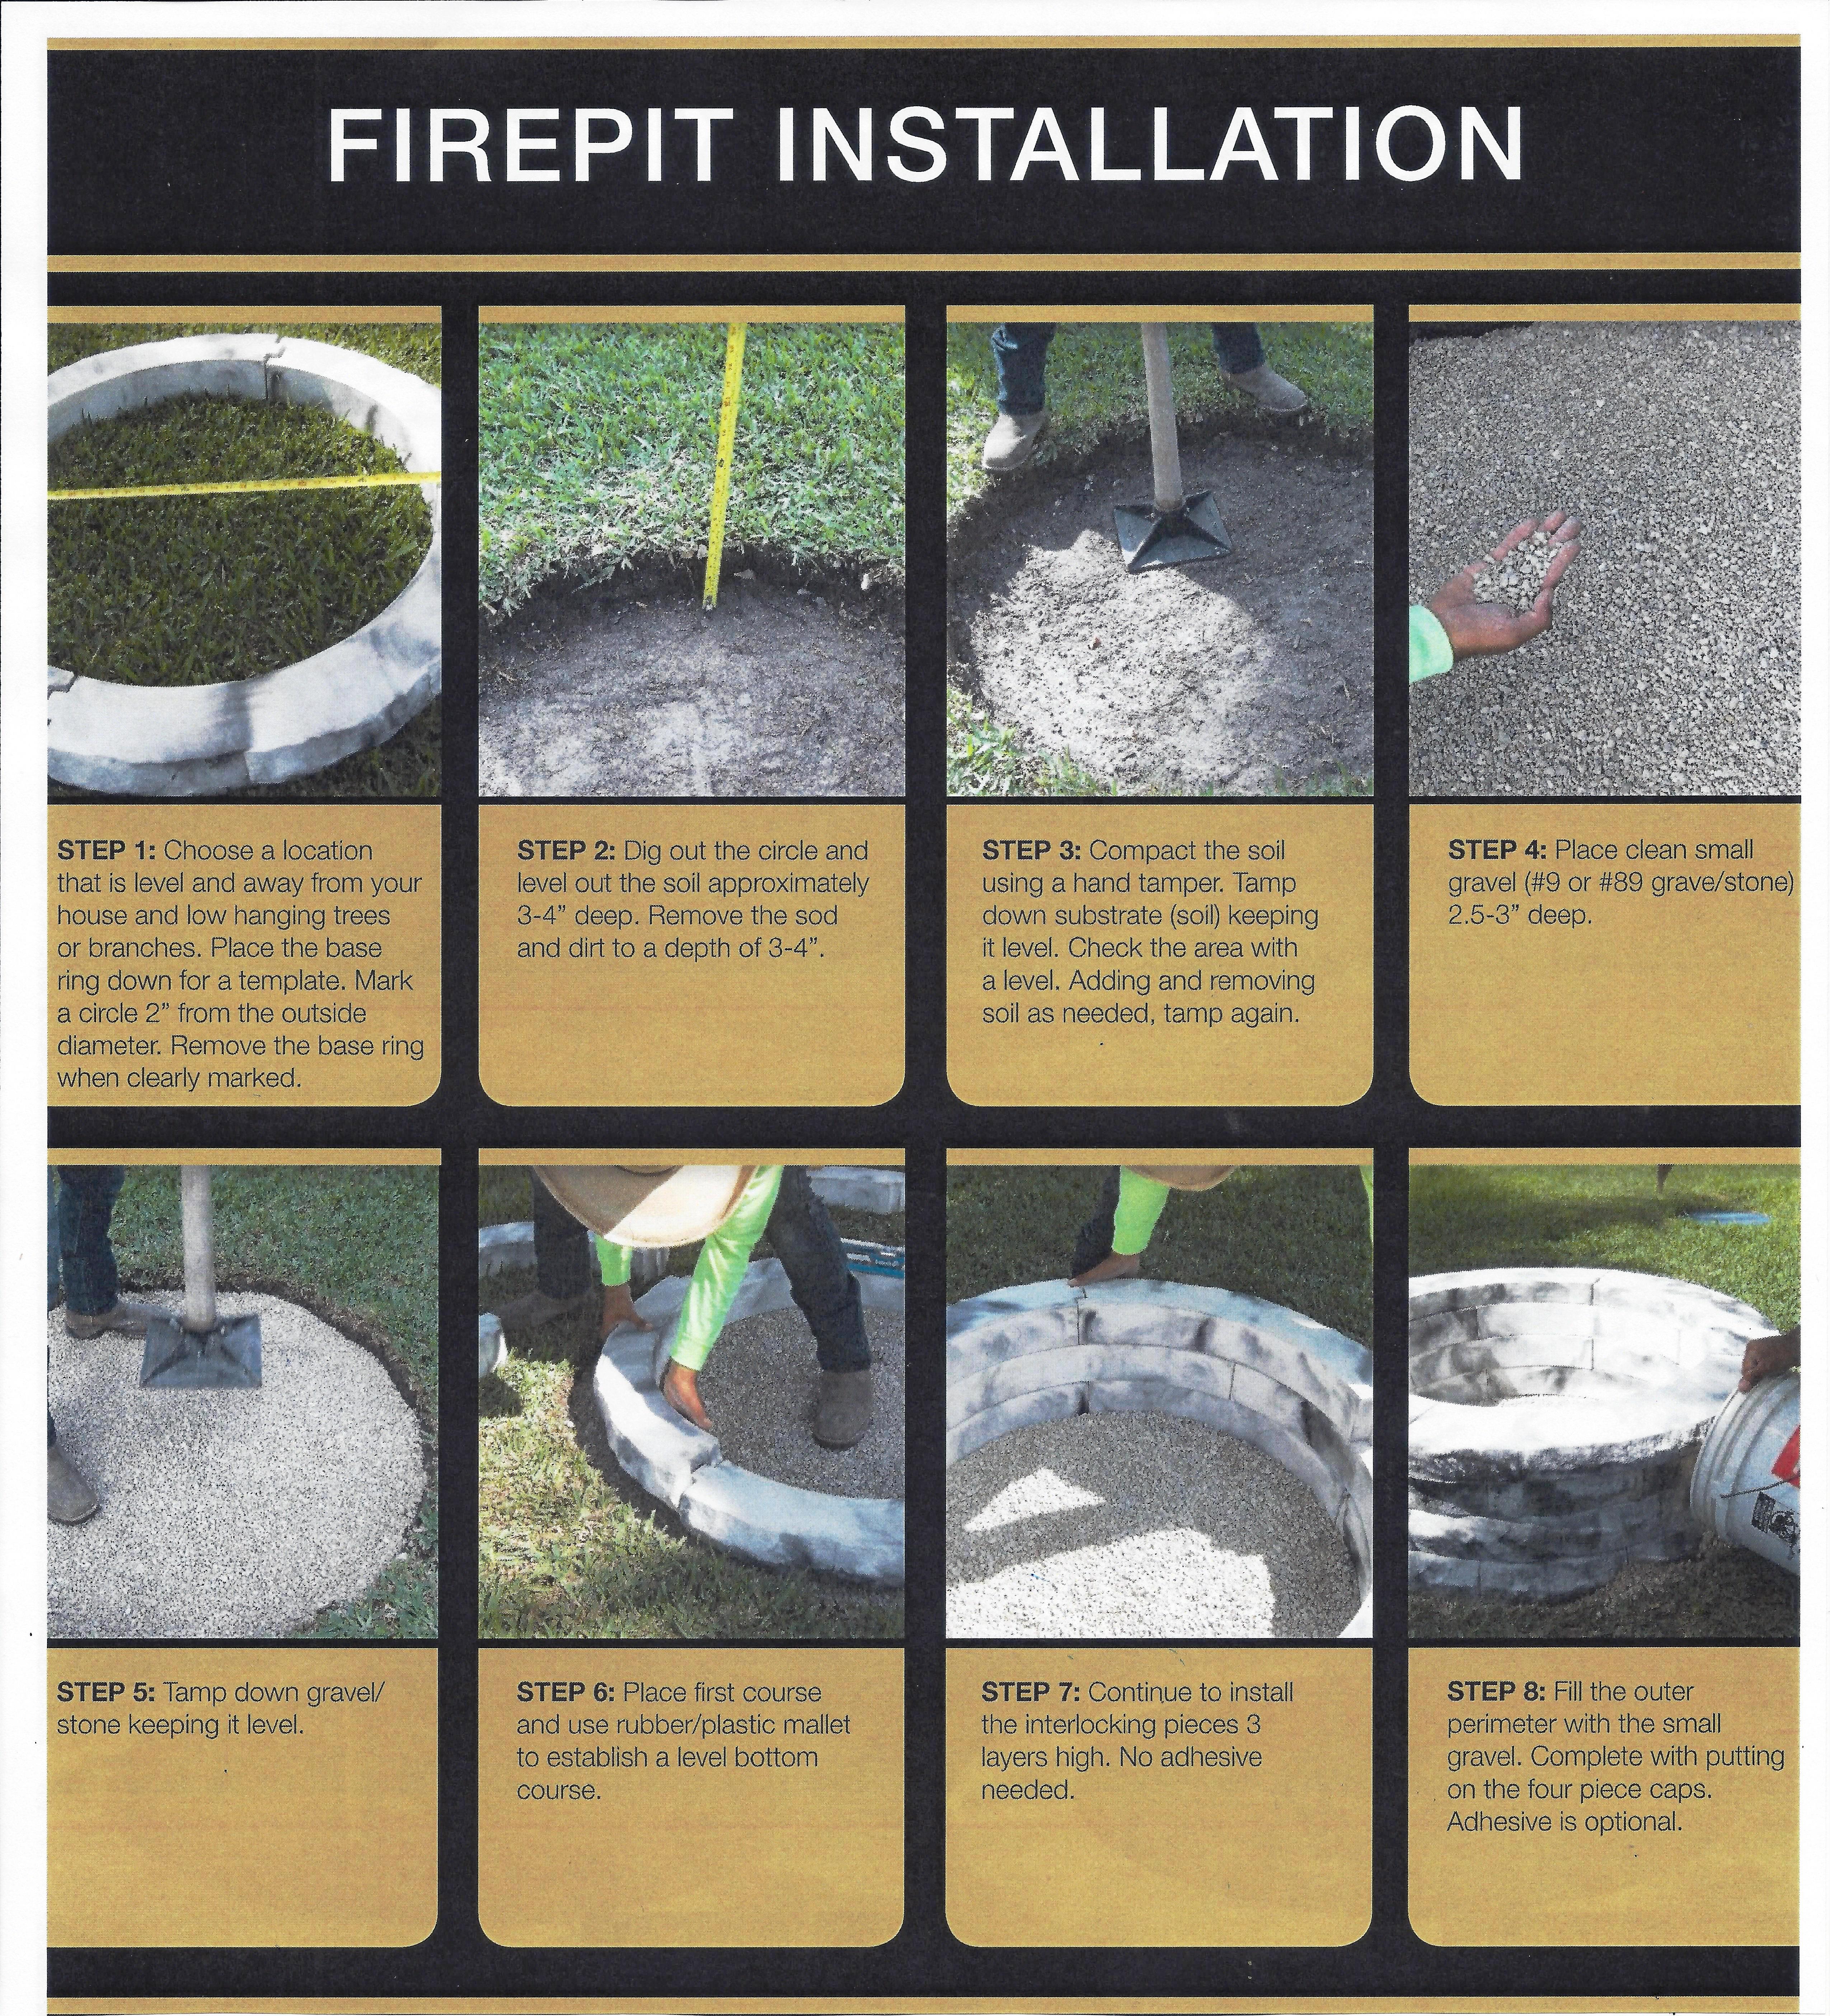 Specialty S Pebble Junction, Fire Pit Installation Instructions